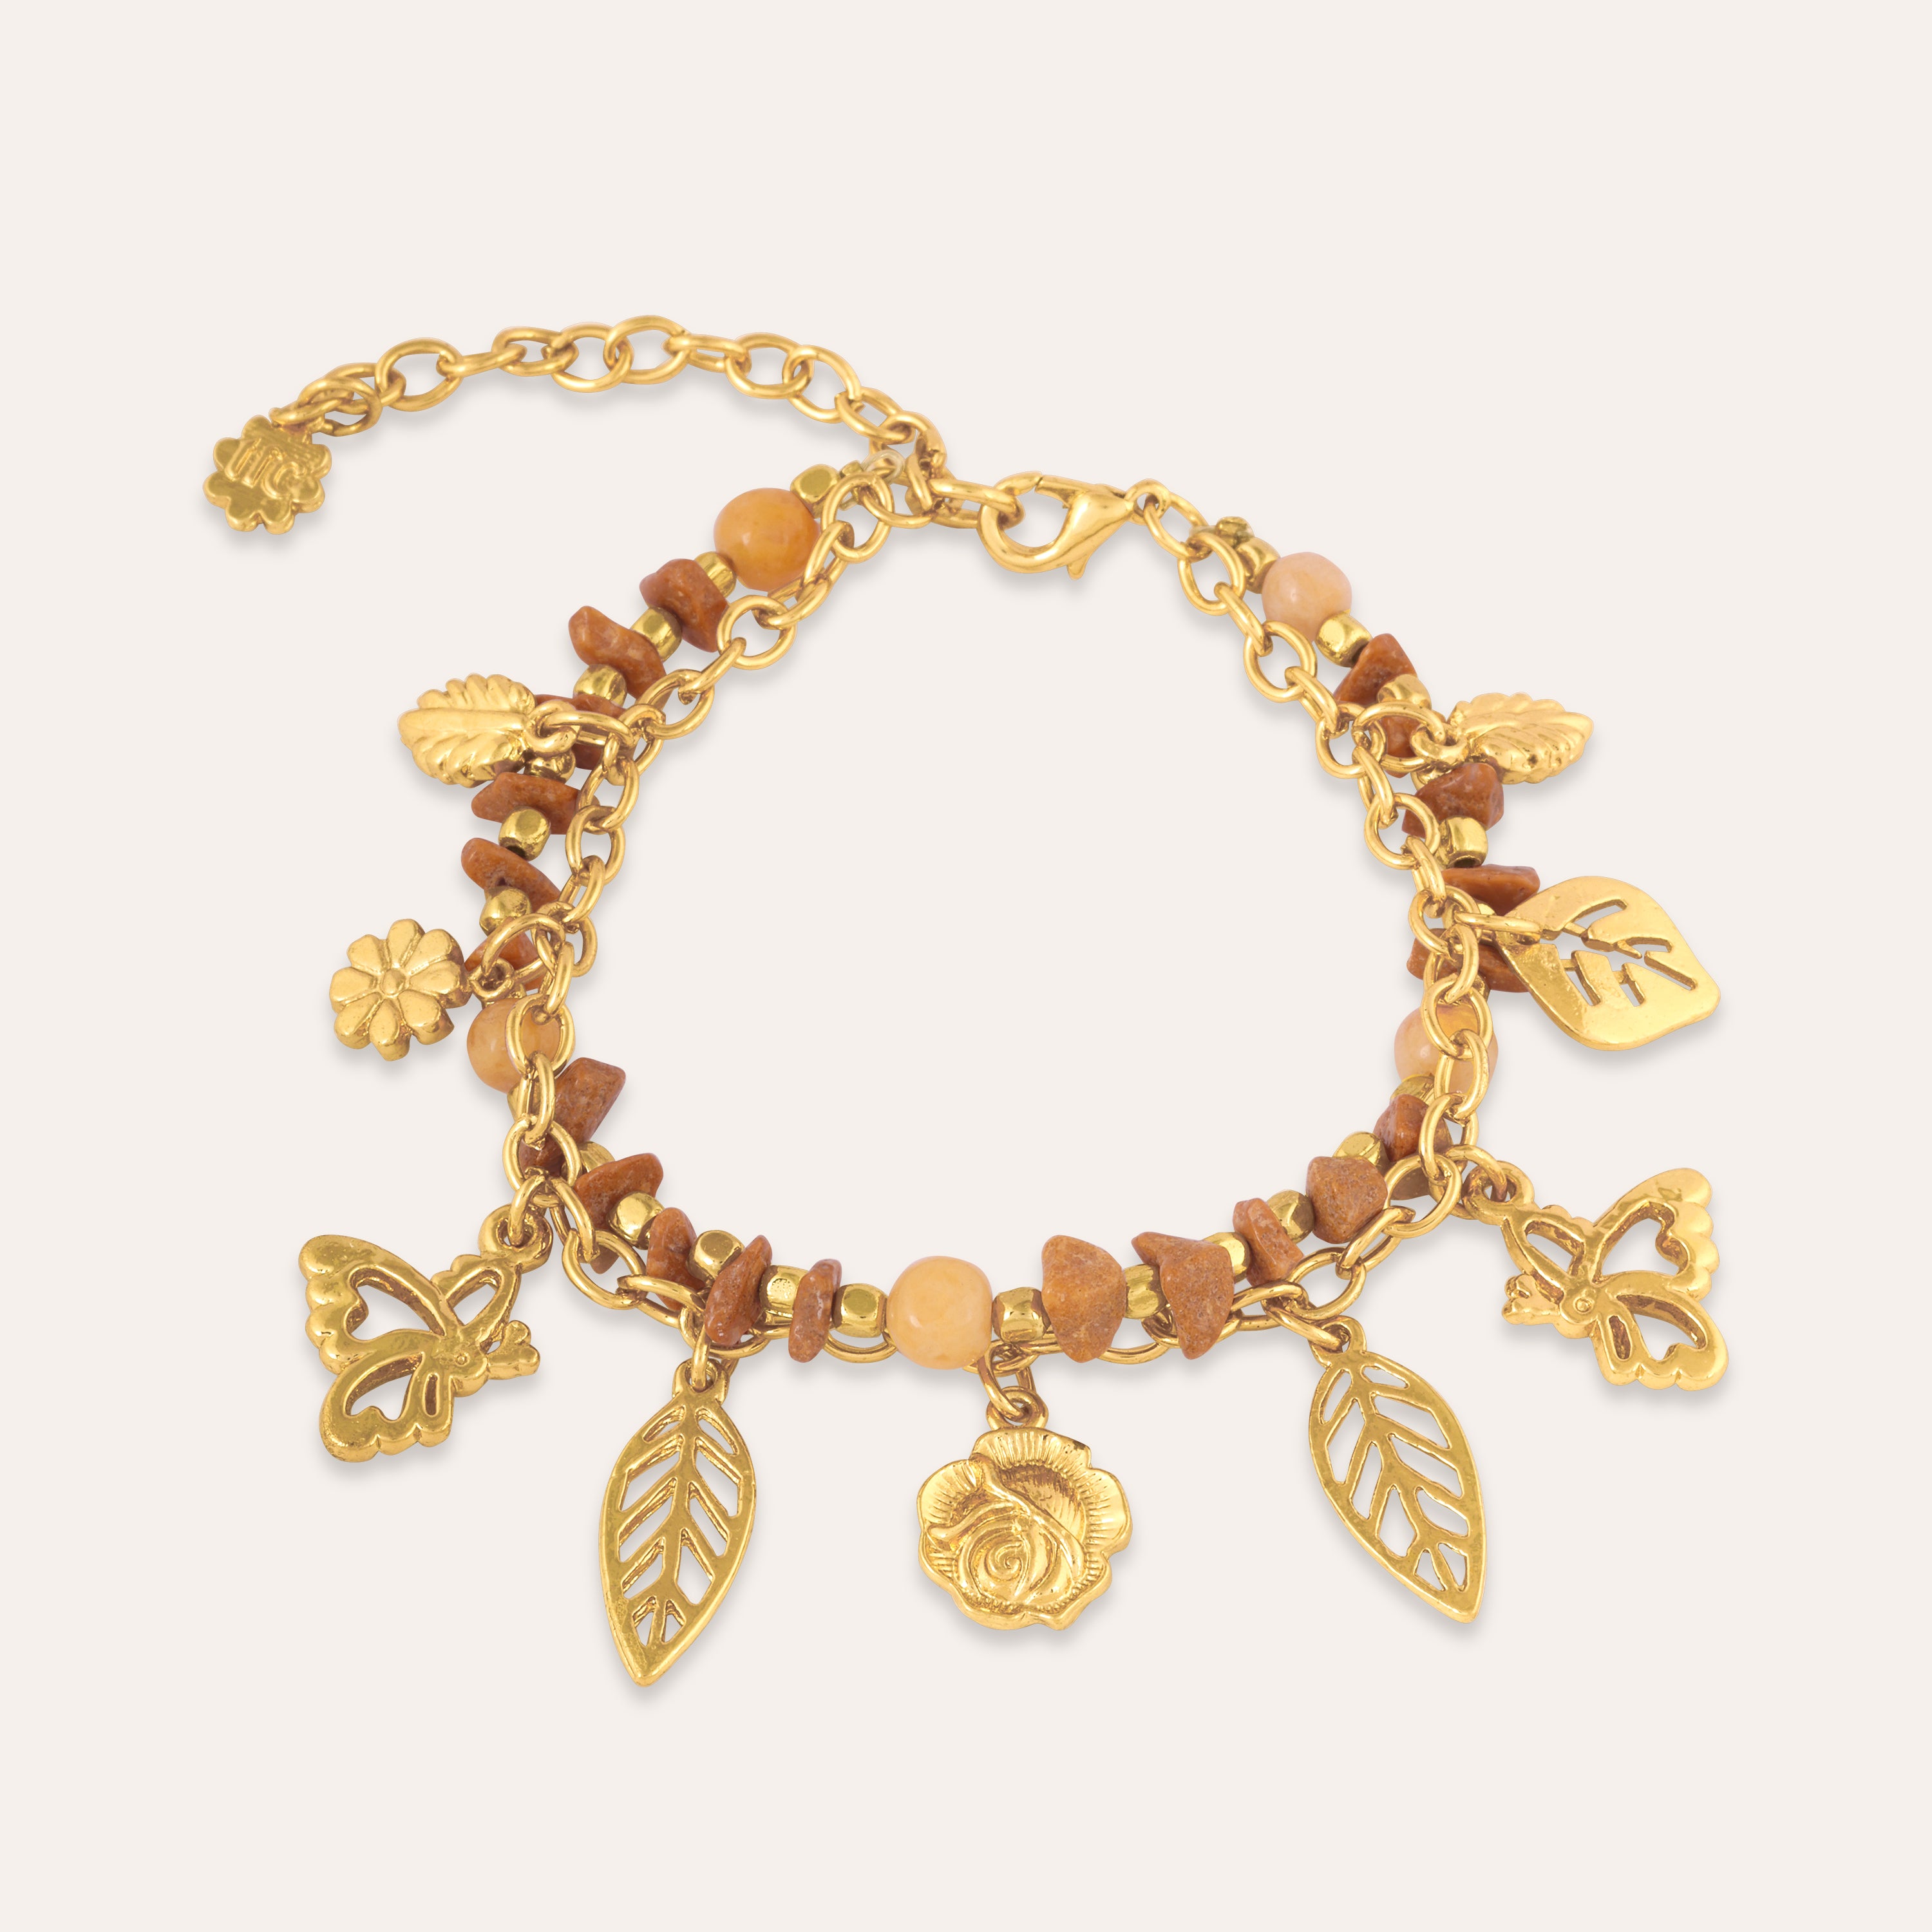 TFC Stones and Charms Gold Plated Bracelet Stack-Discover our stunning collection of stylish bracelets for women, featuring exquisite pearl bracelets, handcrafted beaded bracelets, and elegant gold-plated designs. Enjoy cheapest anti-tarnish fashion jewellery and long-lasting brilliance only at The Fun Company.